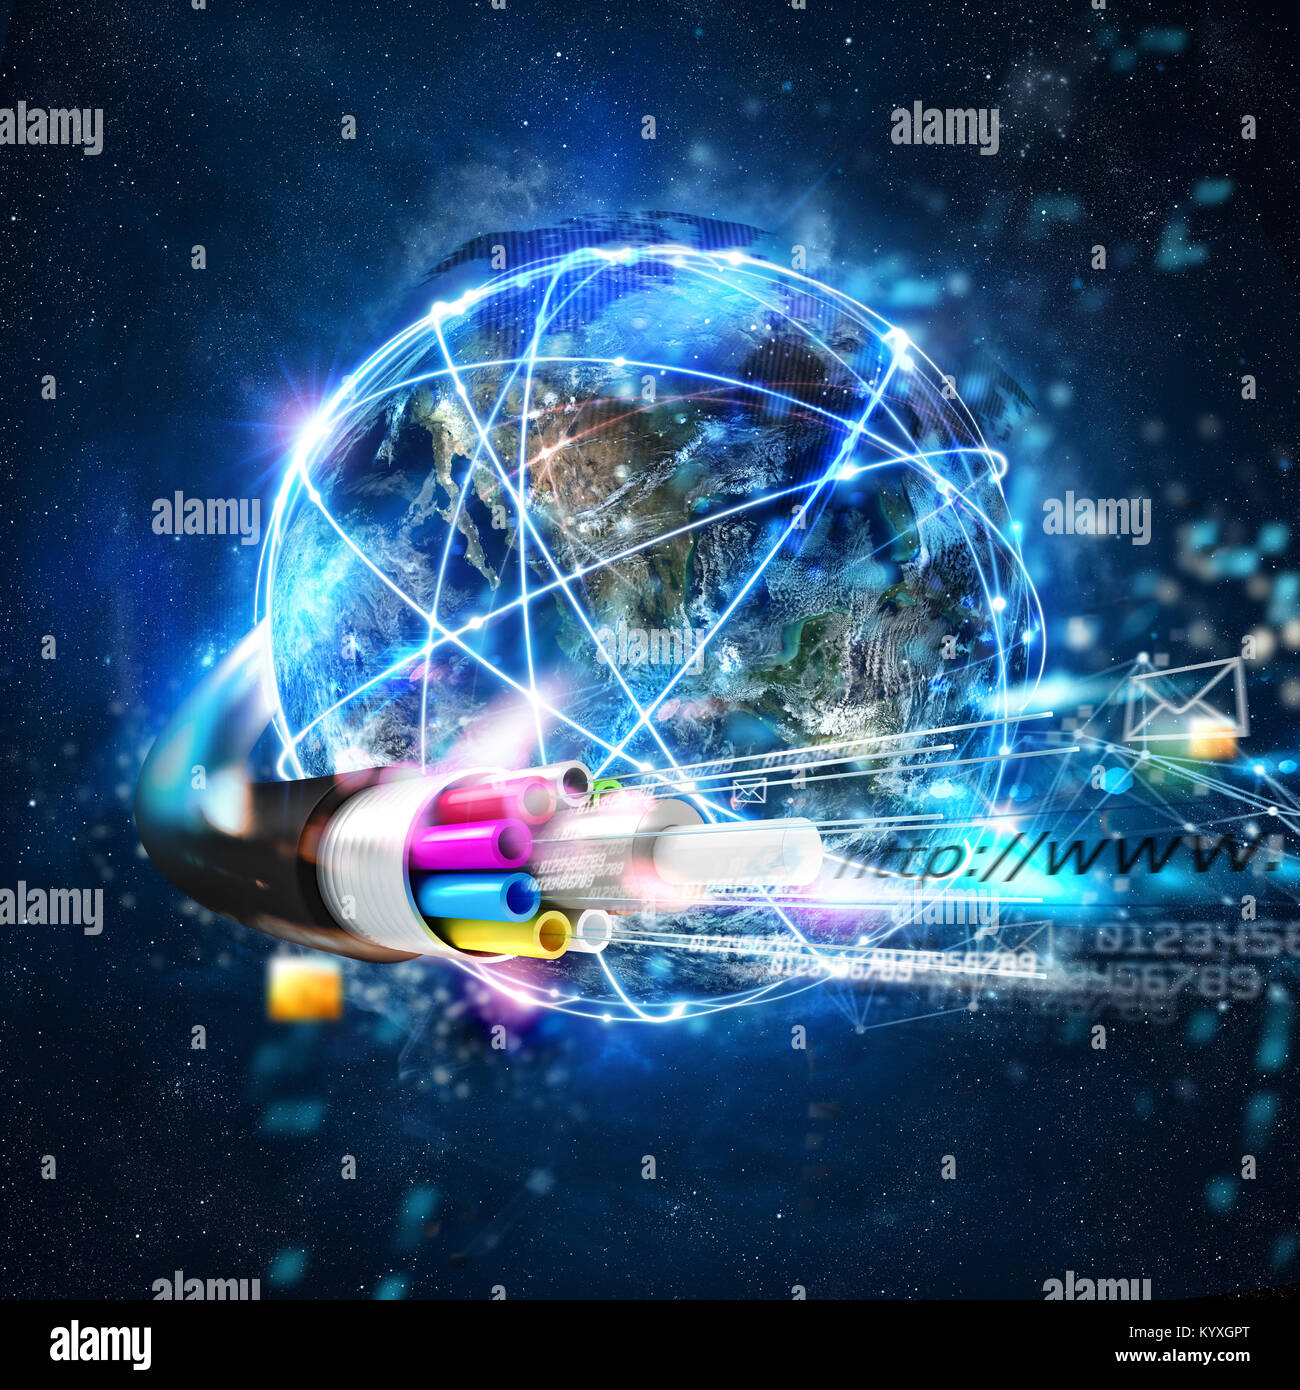 Fast internet worldwide connection with the optical fiber Stock Photo